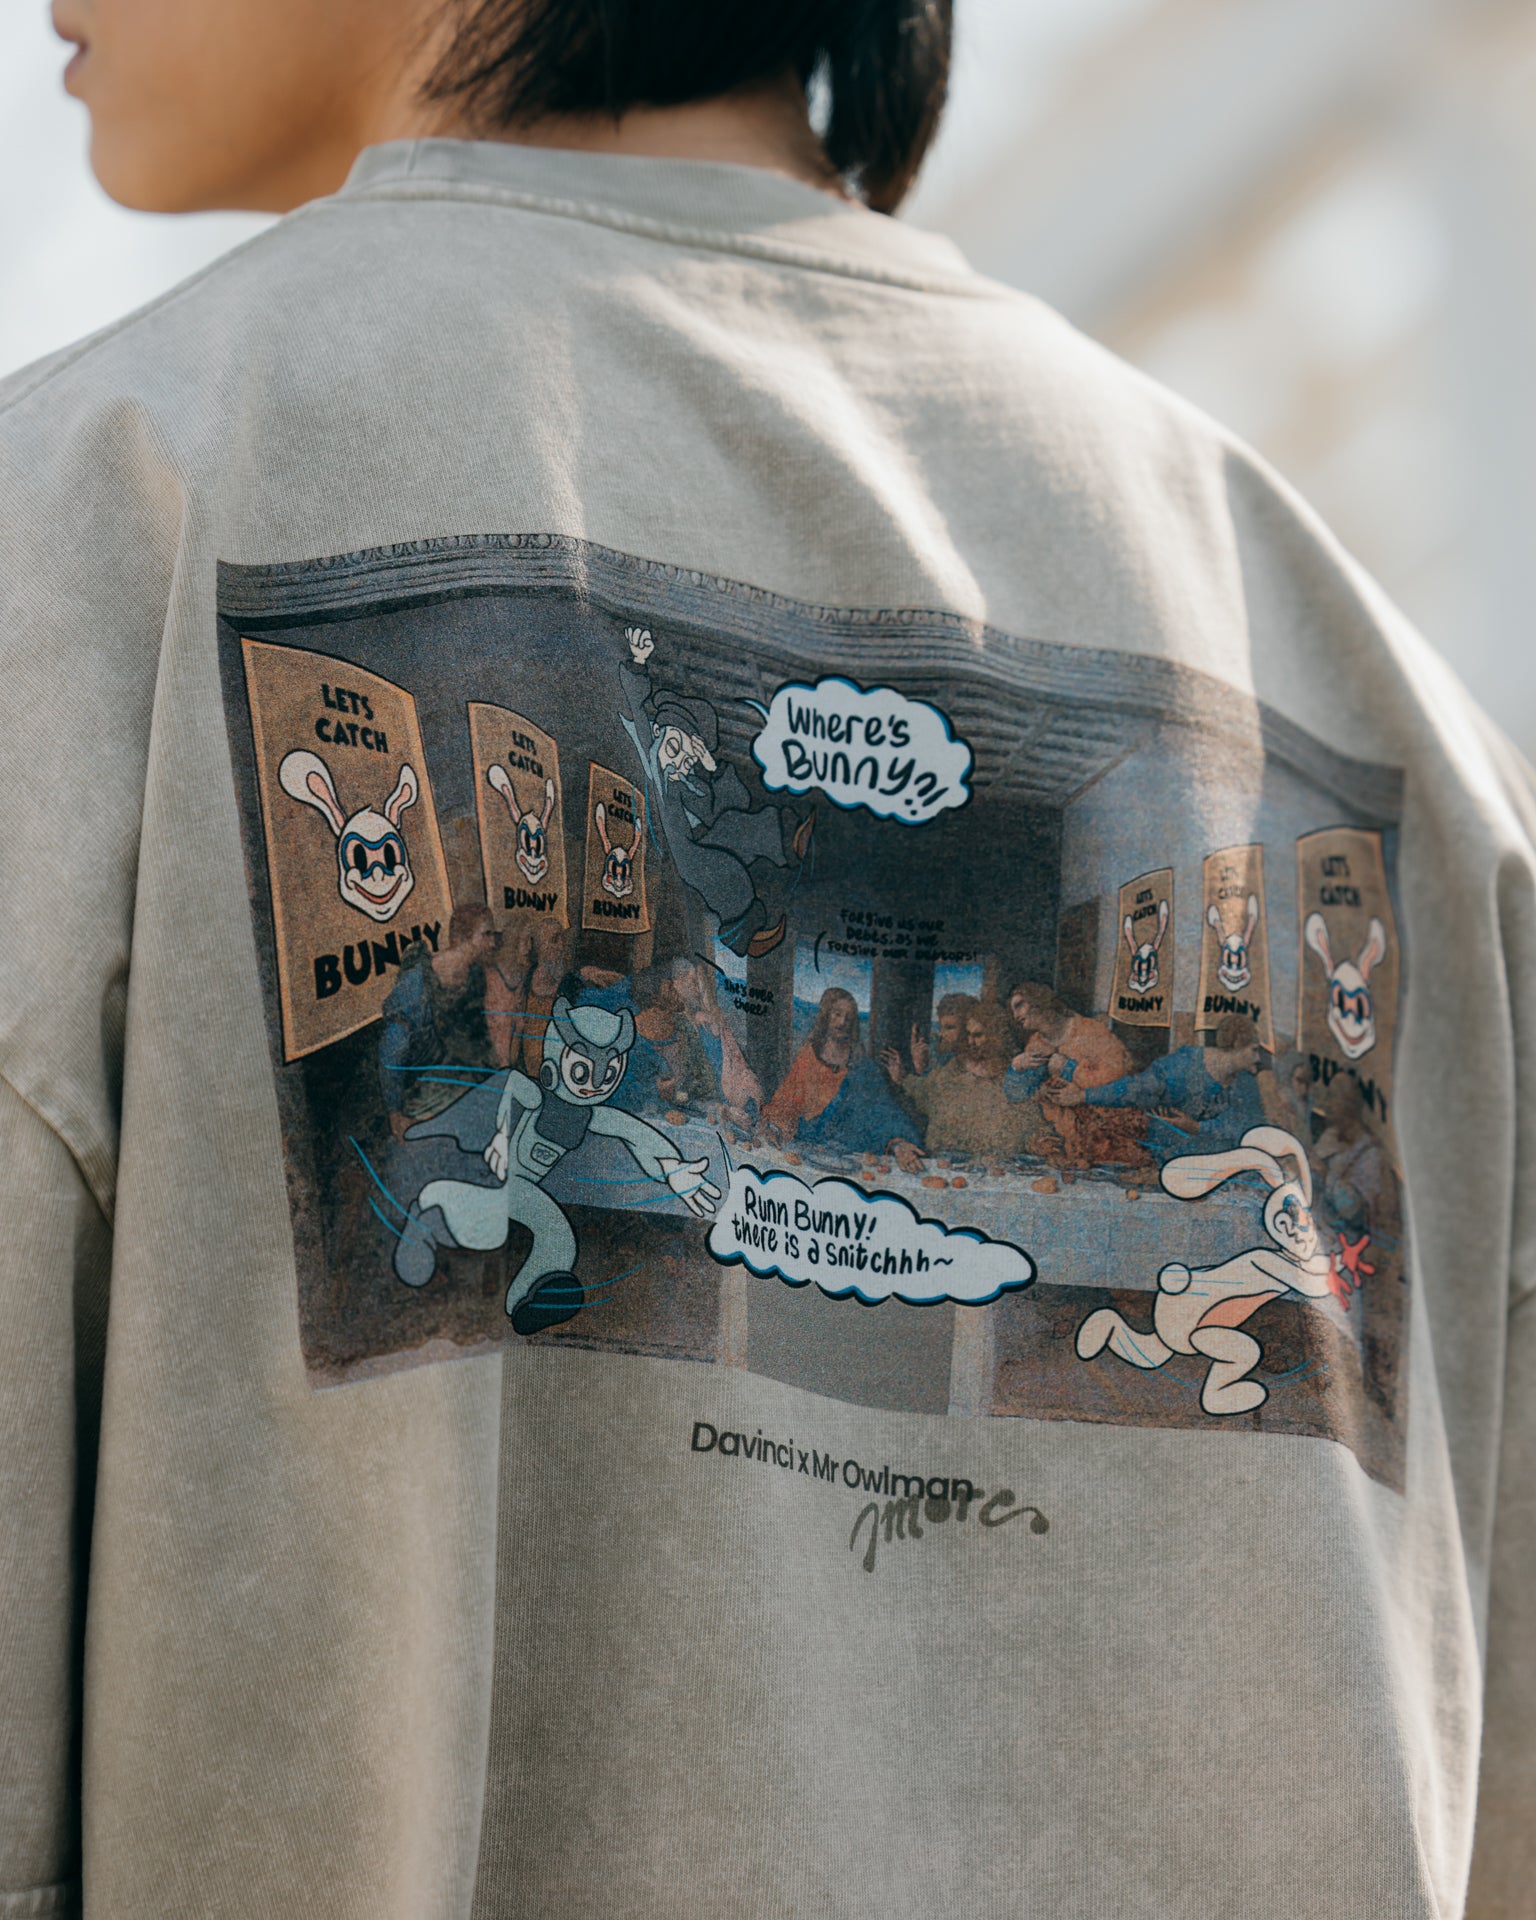 Grocery x Mr.Owlman & Friends Last Supper Washed Tee/Sand